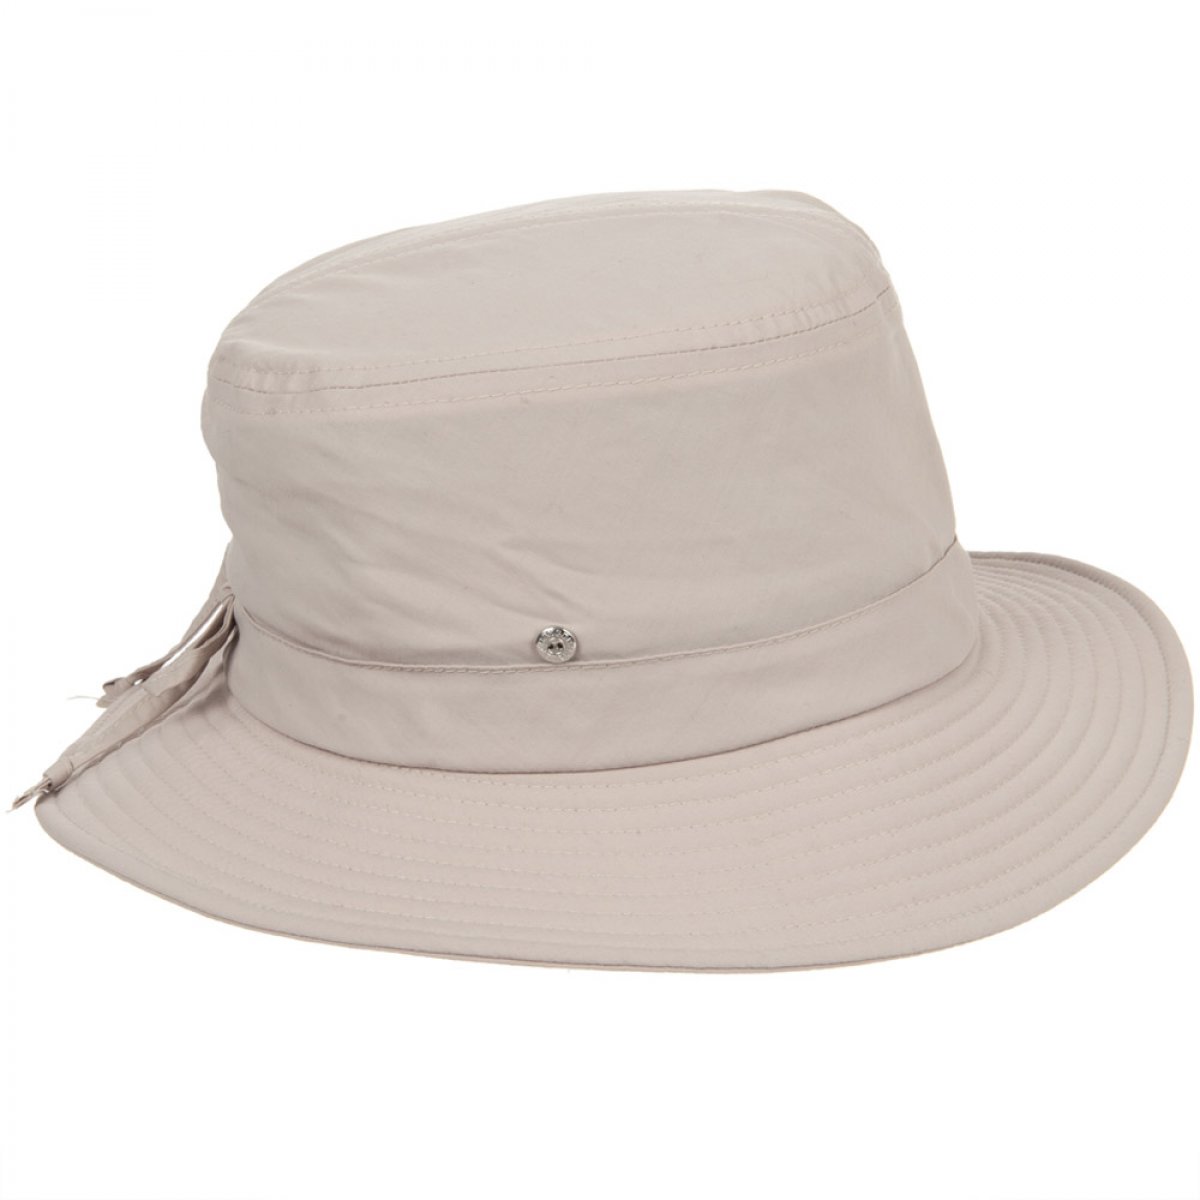 Casual summer hat for women by MAYSER